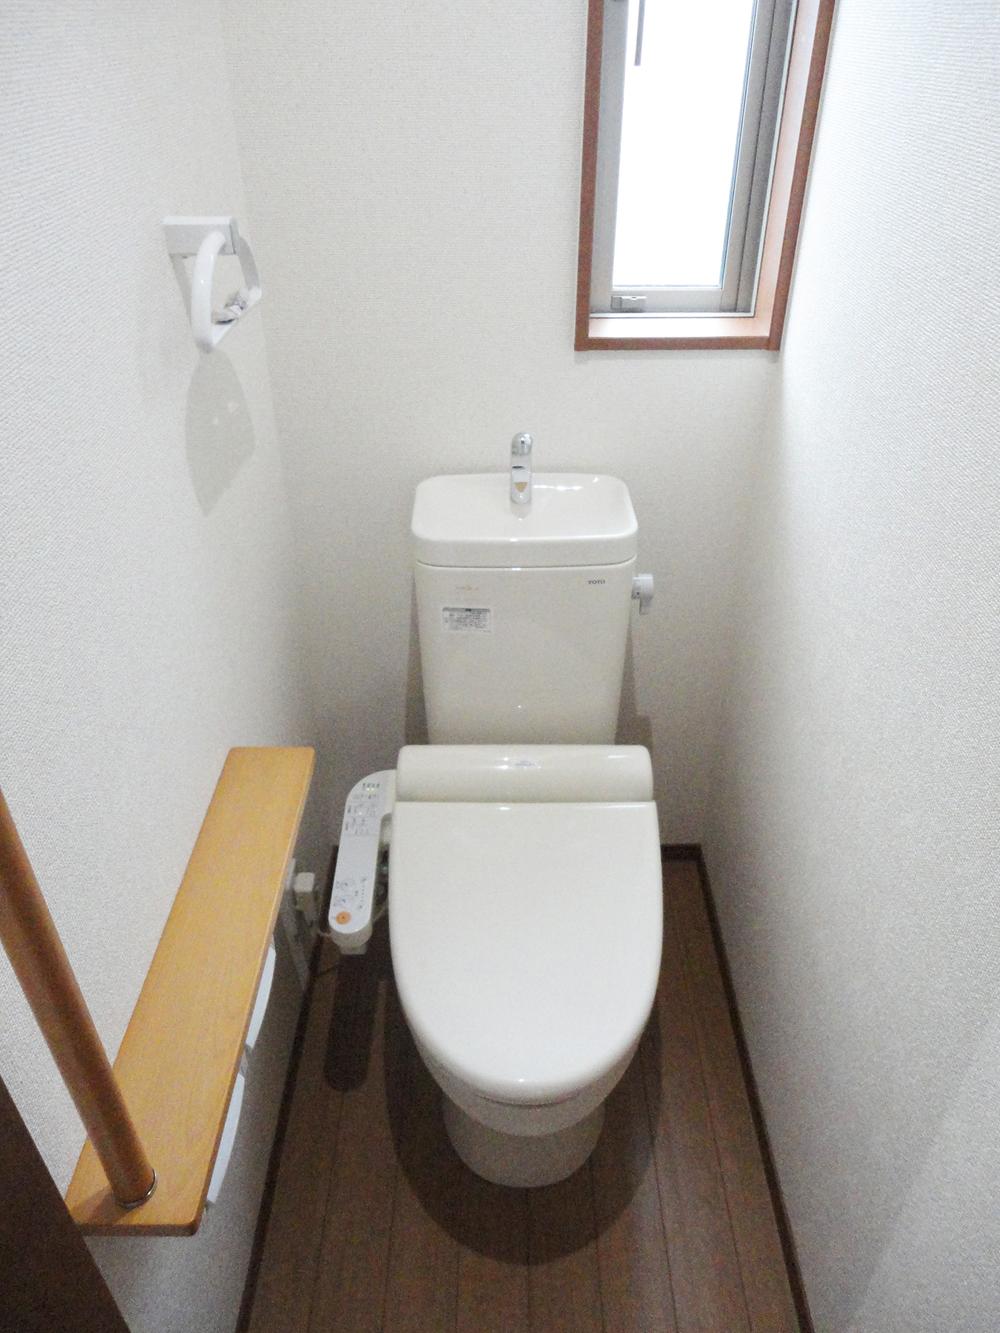 Toilet. It is a high-function toilet. Toilet lid opens automatically.